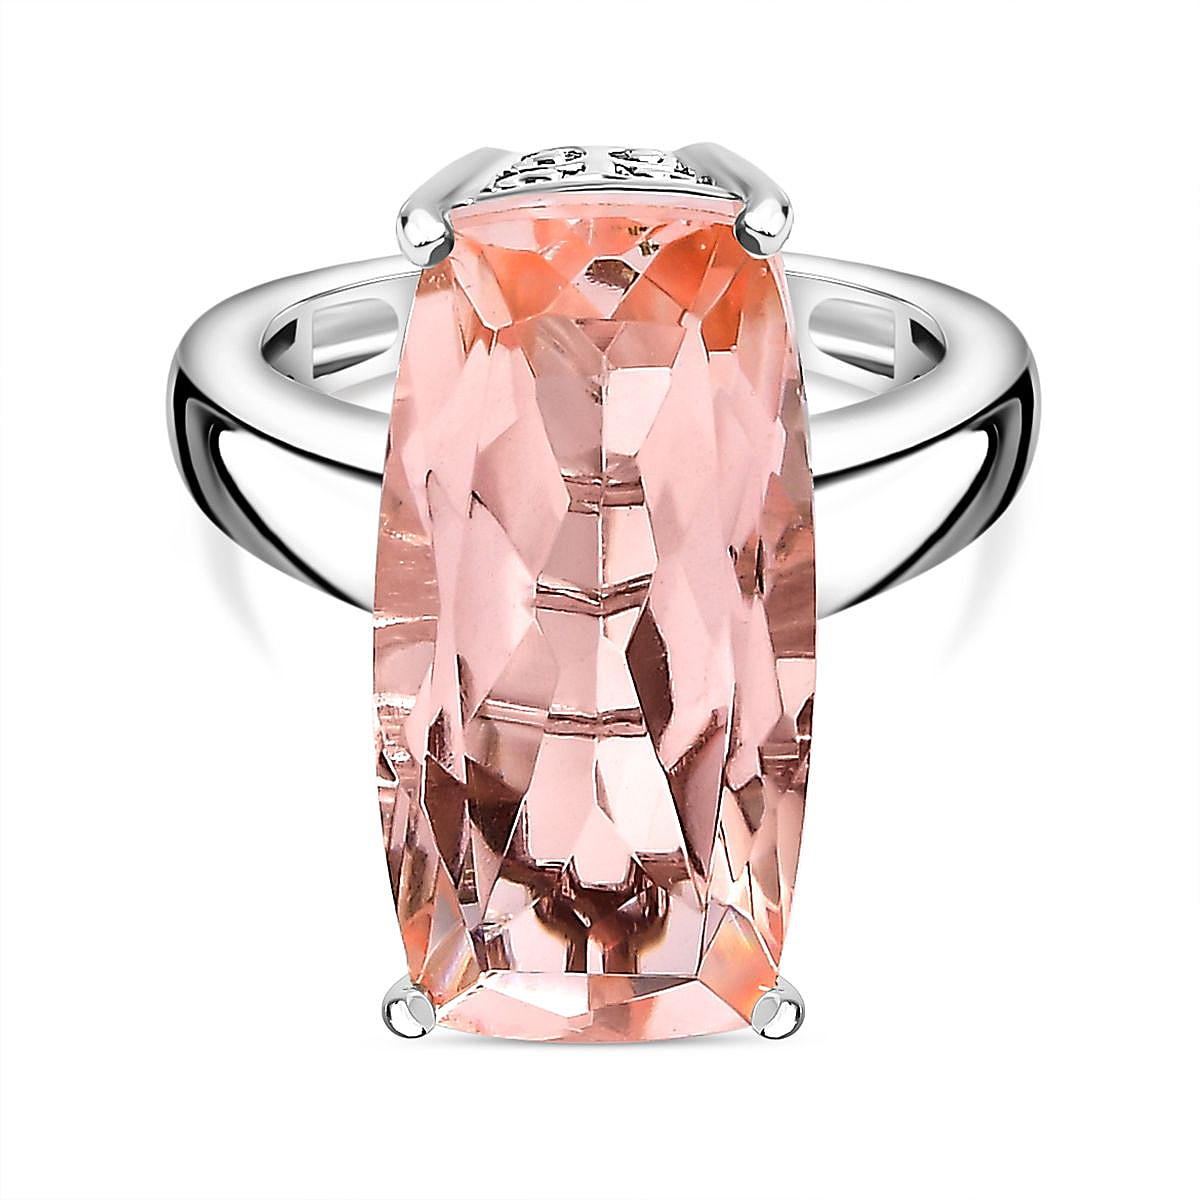 Morganite Triplet Quartz Solitaire Ring in Platinum Overlay Sterling Silver 11.10 Ct, Silver Wt 5.00 Ct.